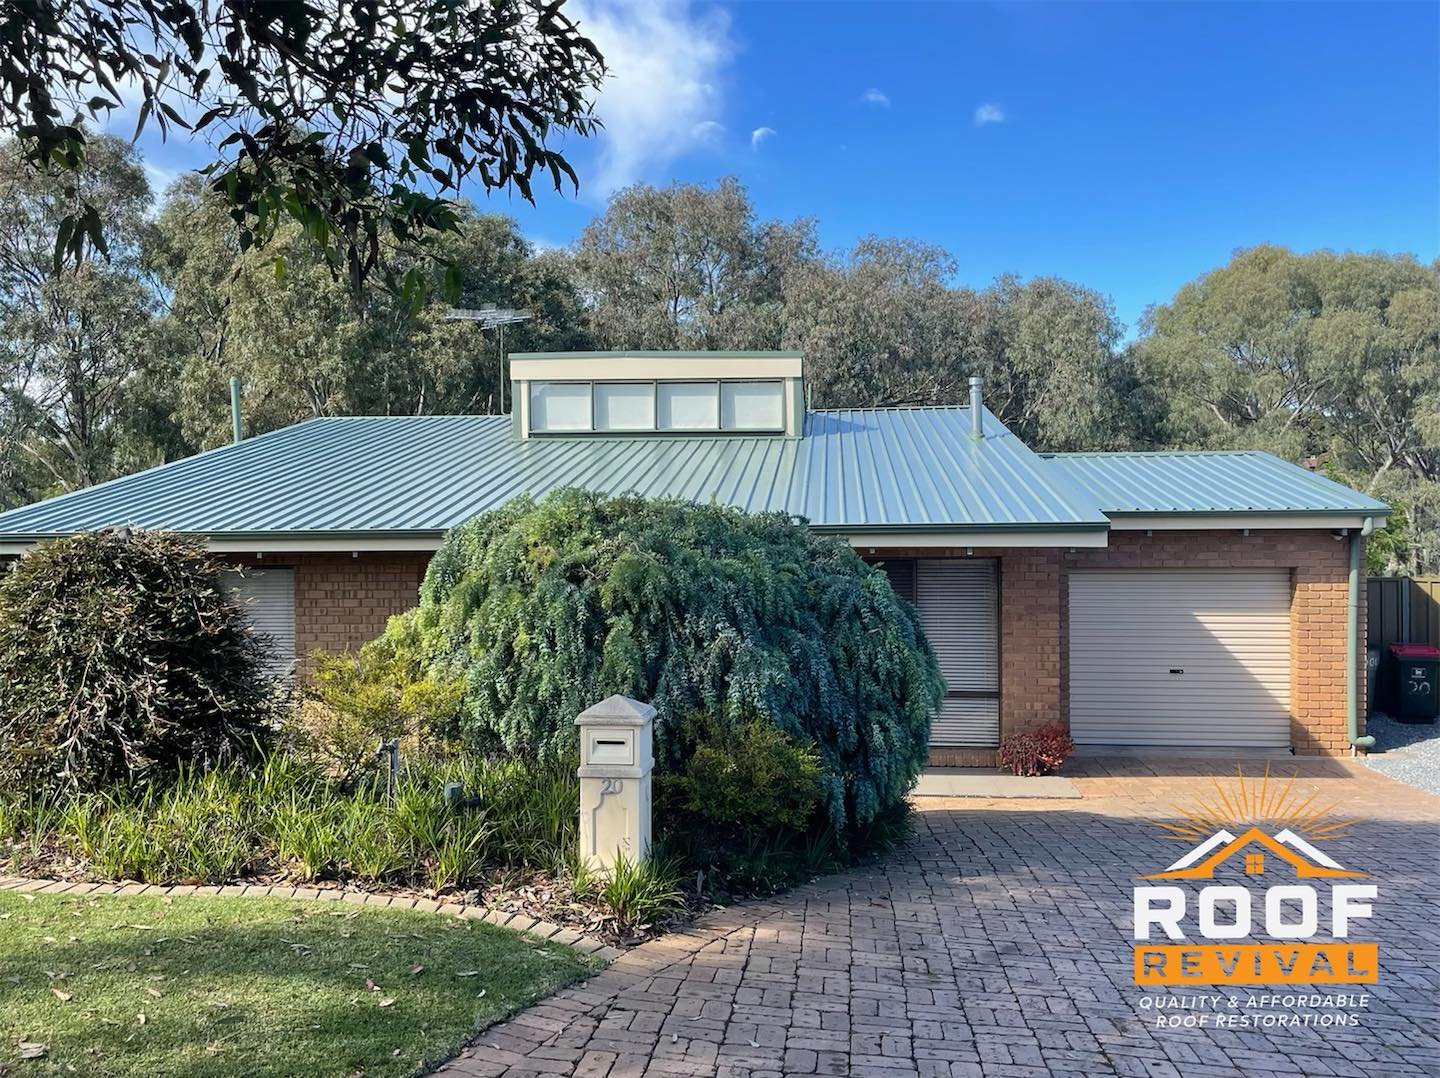 Re-roofing in Australia: Its cost